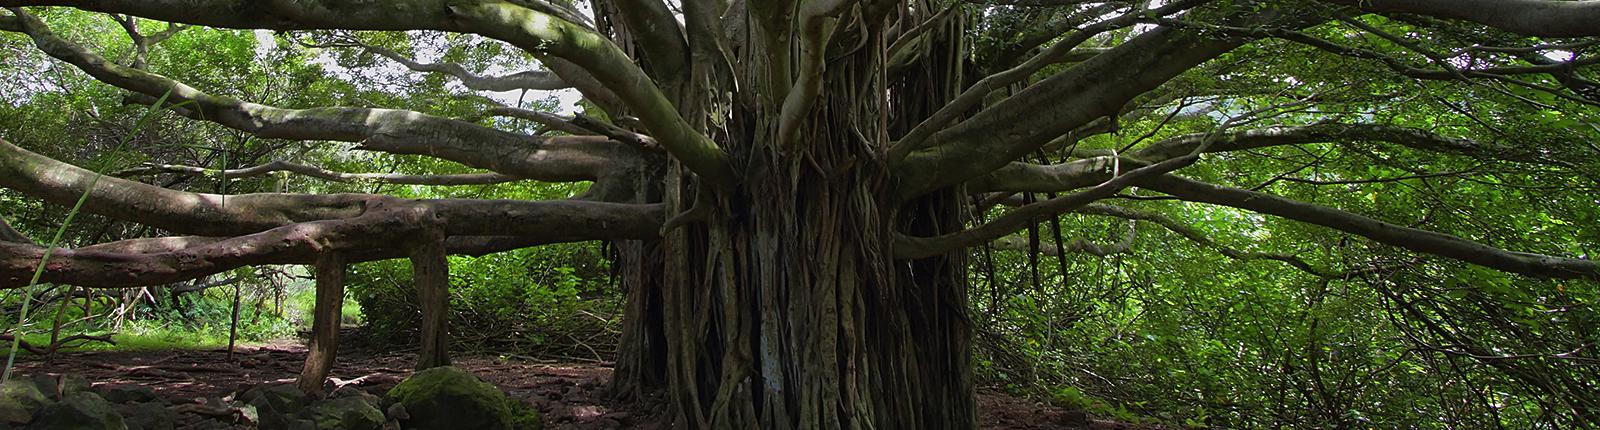 Close up shot of an enormous banyan tree in Hilo, Hawaii